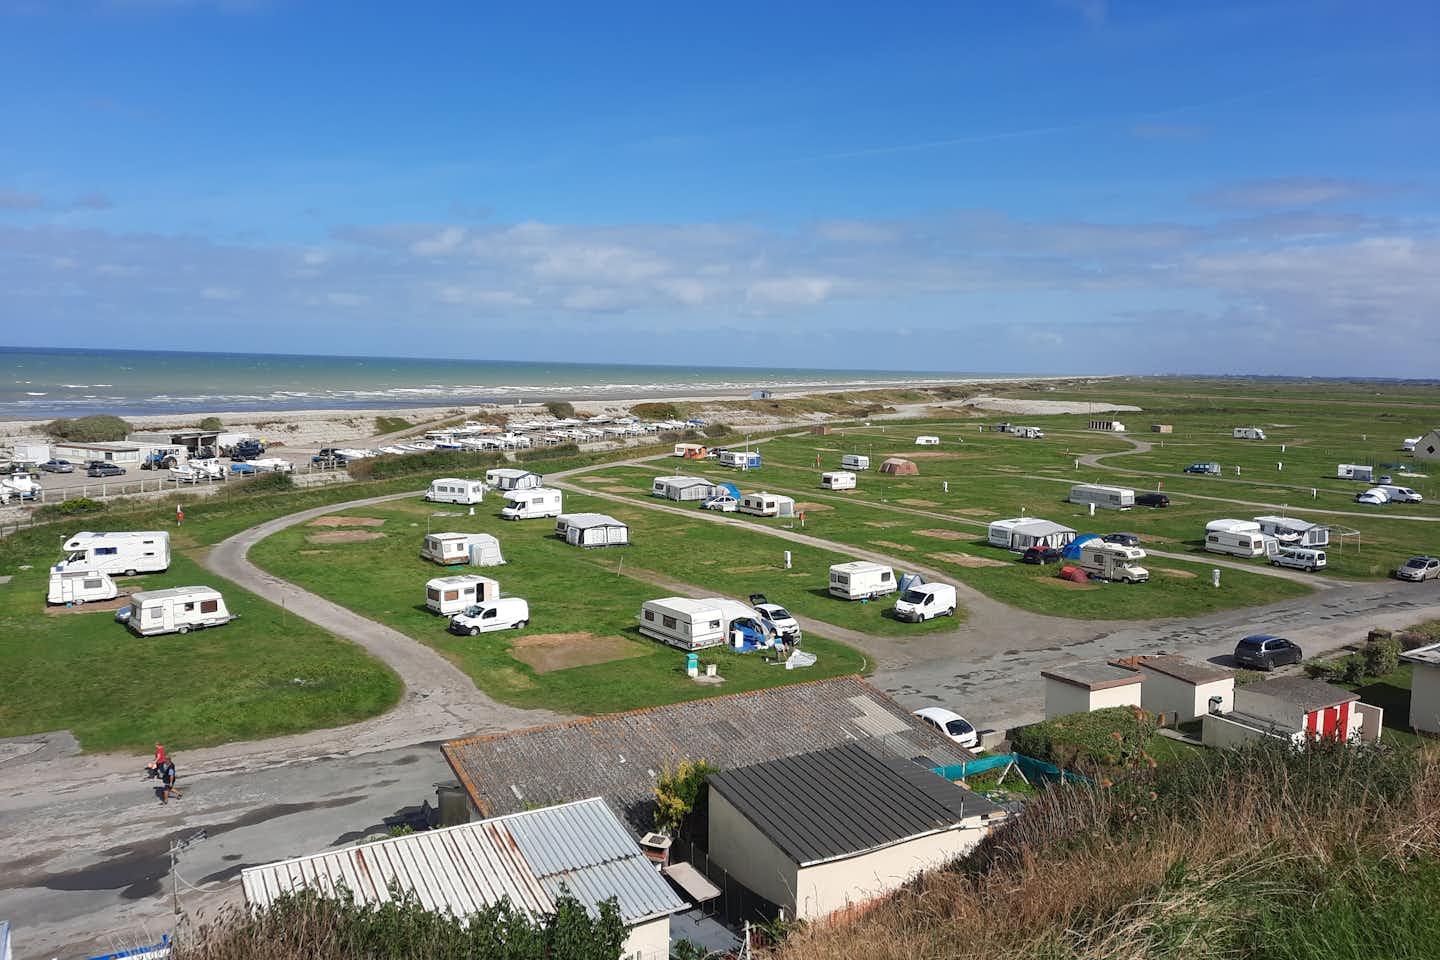 Onlycamp d'Onival  Camping d'Onival  - Luftaufnahme des Campingplatzes am Meer